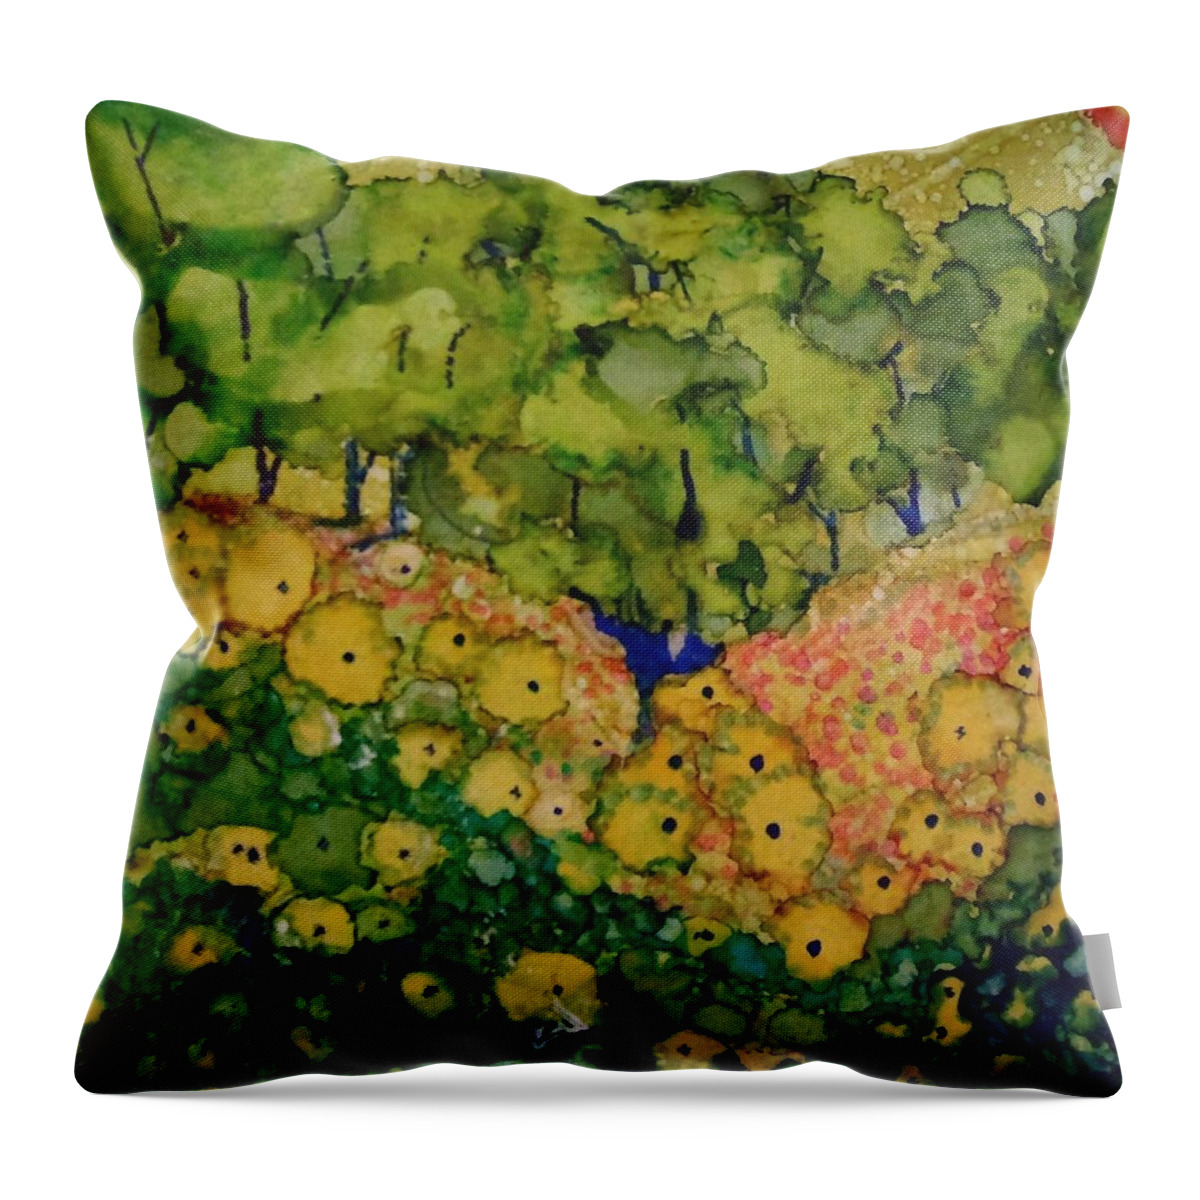 Landscape Throw Pillow featuring the painting Summer Hills by Betsy Carlson Cross